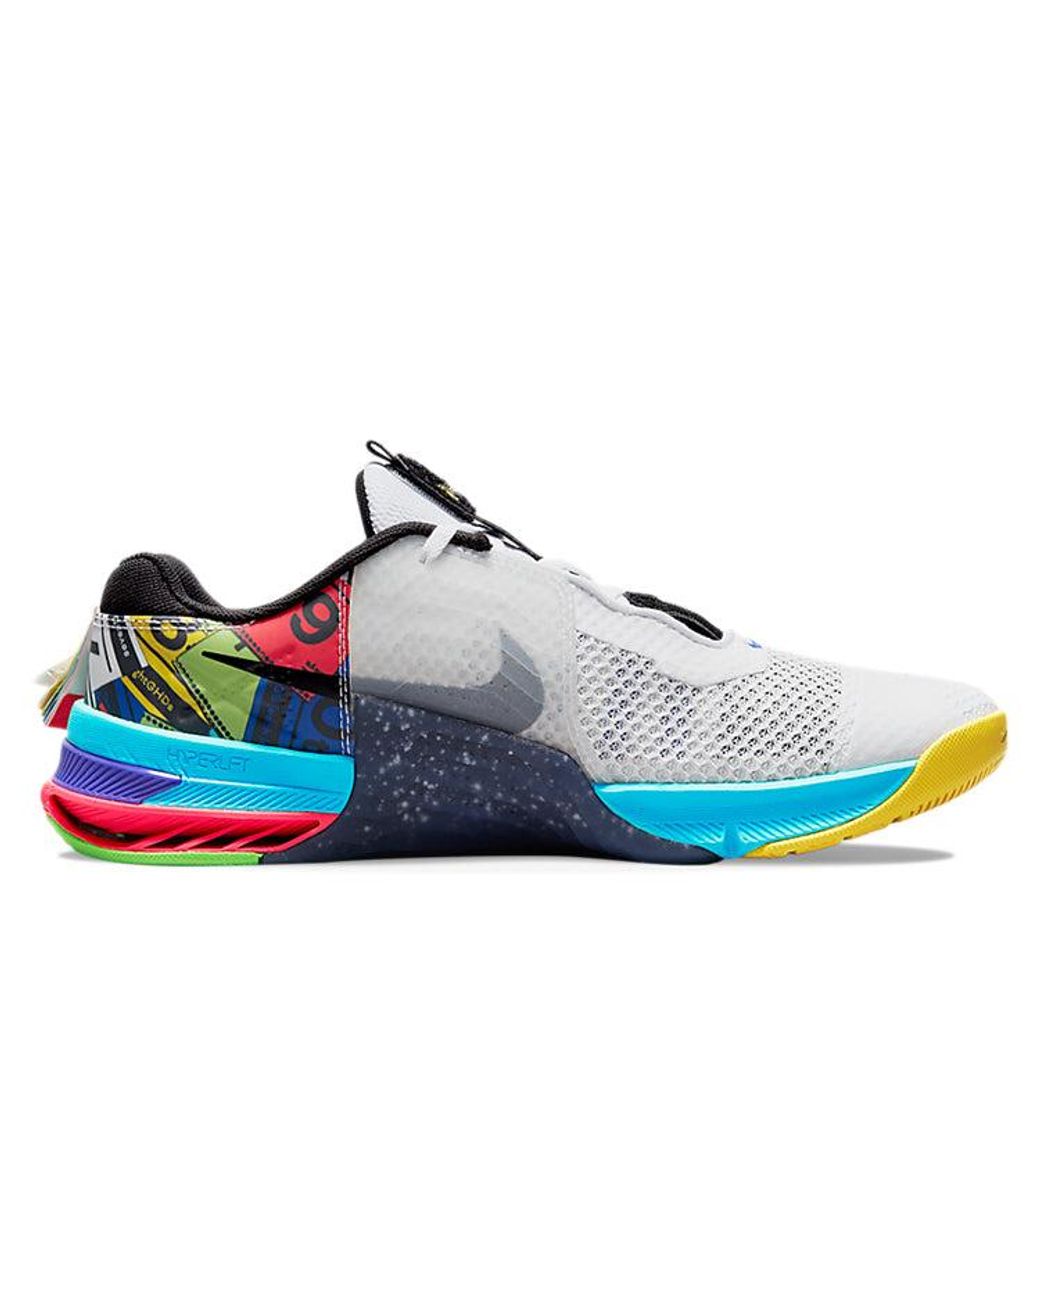 Nike Metcon 7 Amp Low-top Training Shoes Black/white/yellow in Blue | Lyst